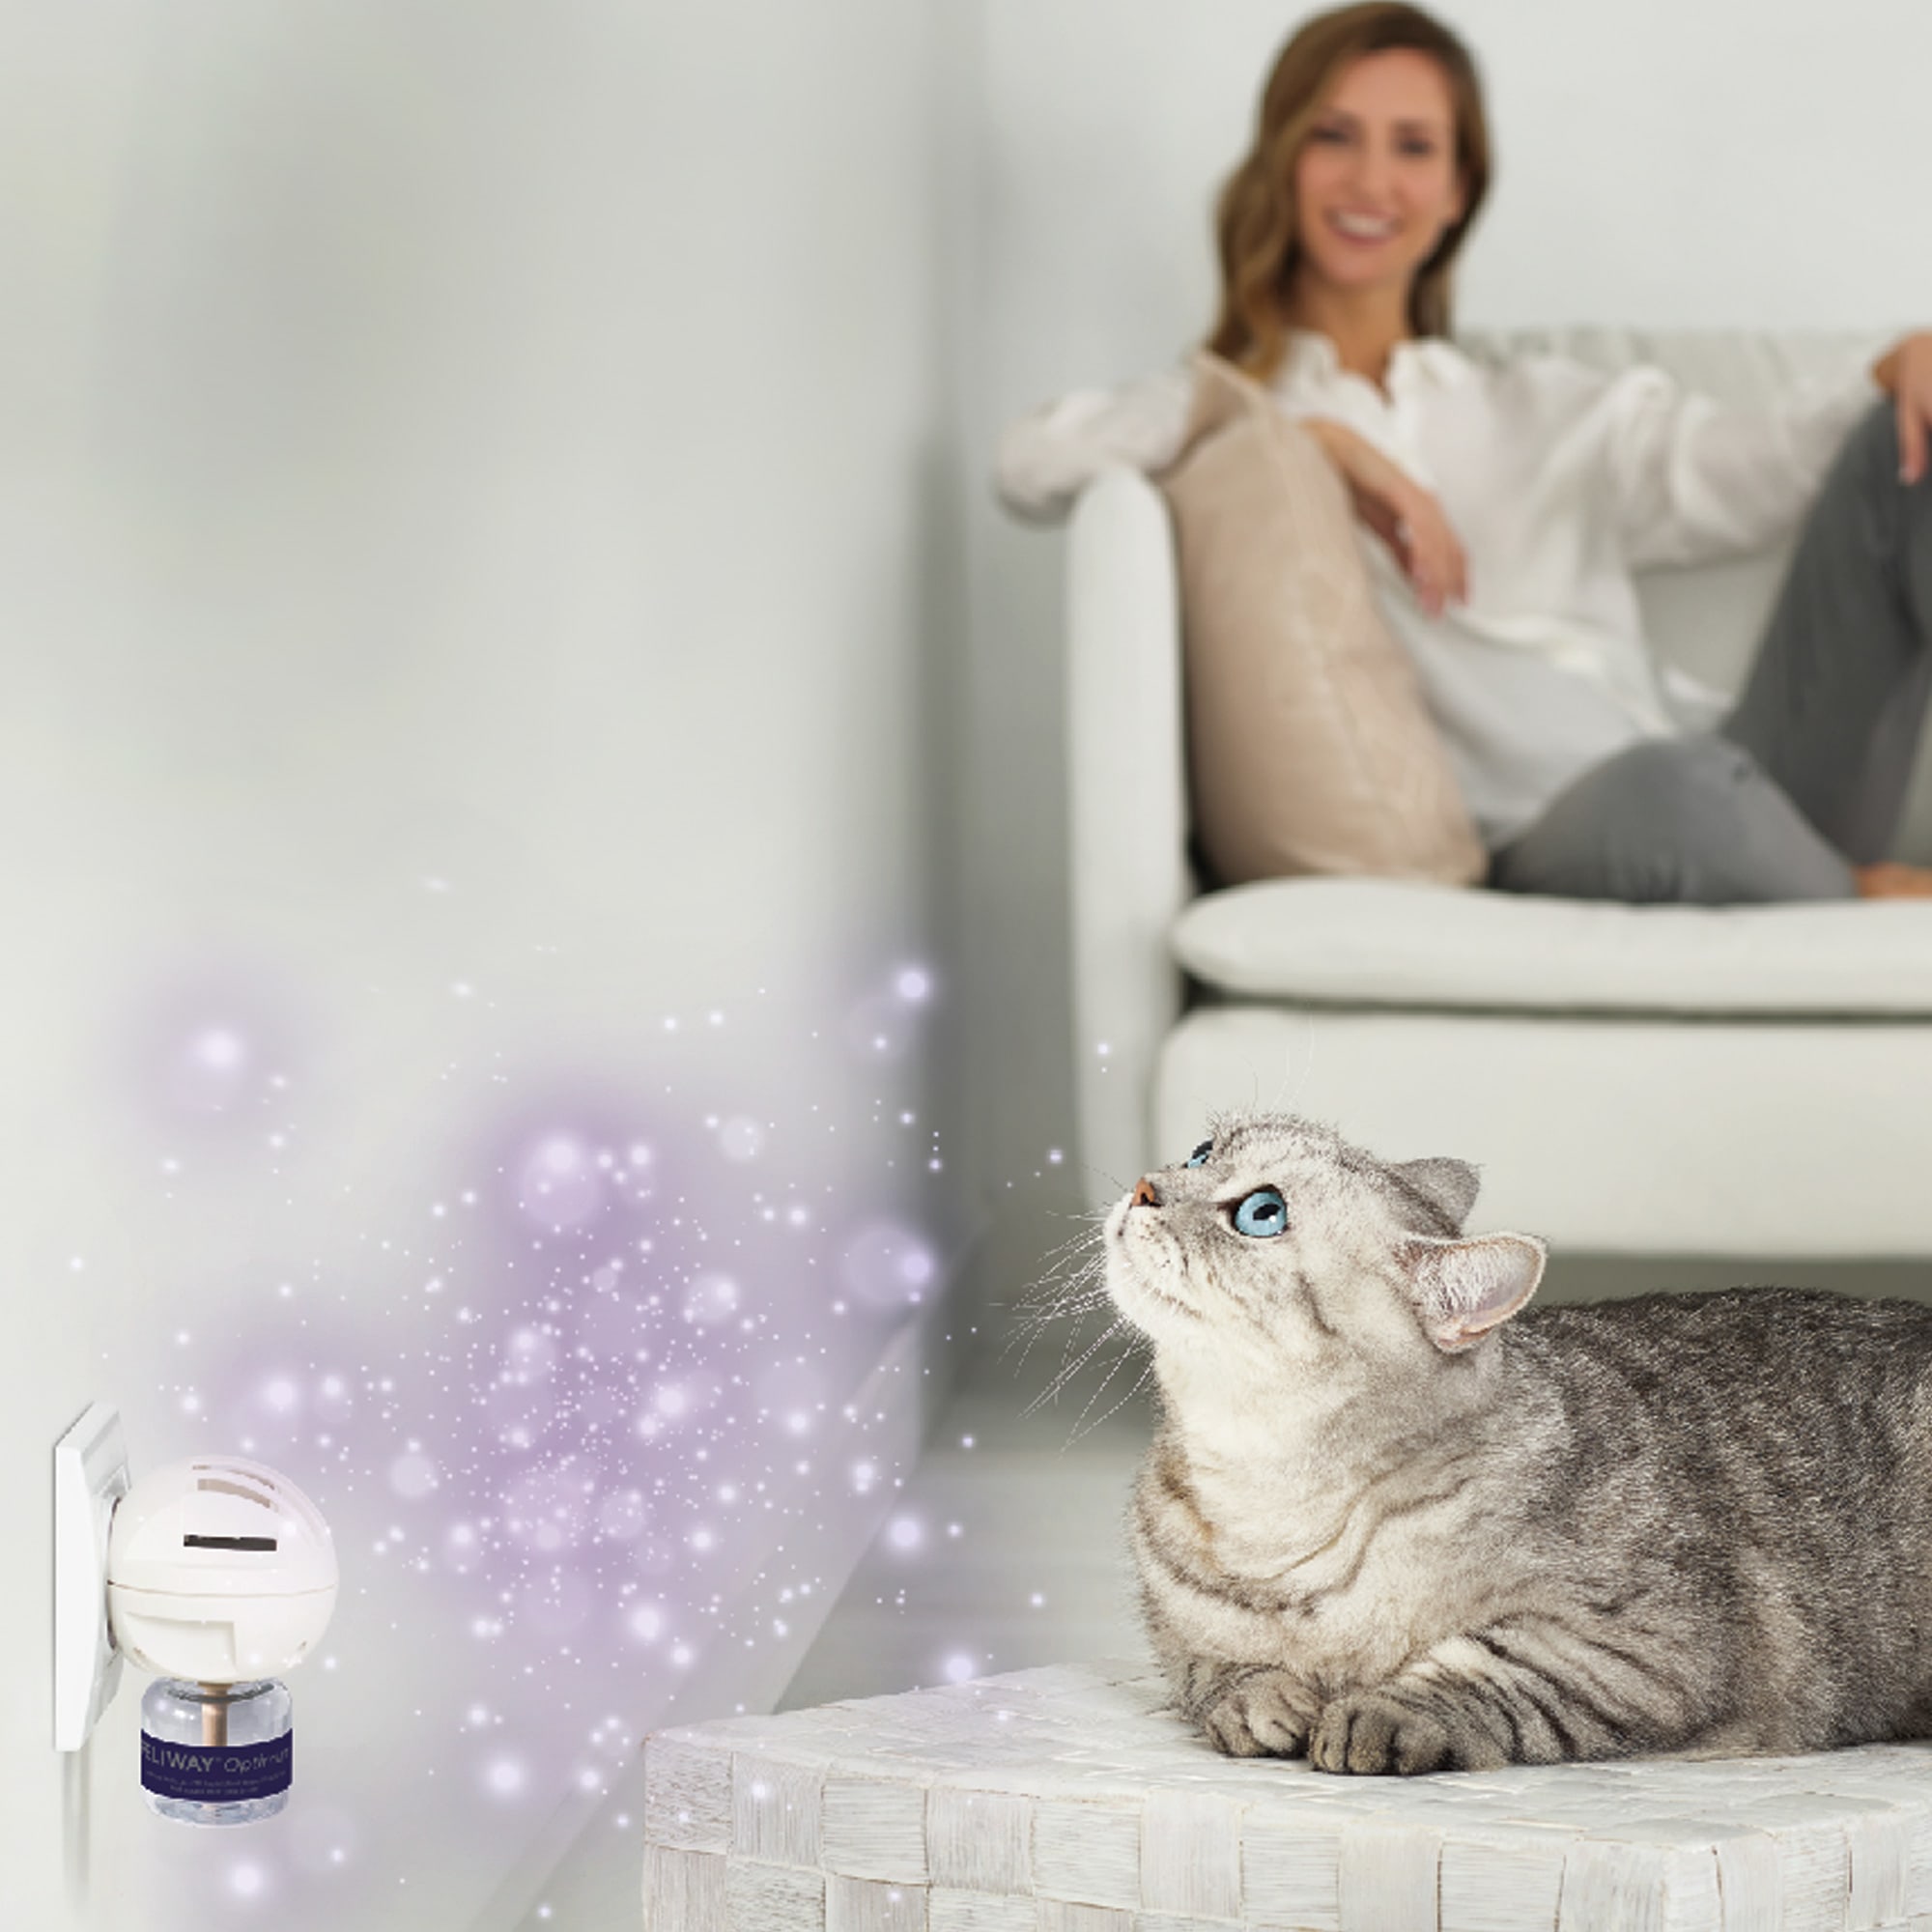 Feliway Optimum - Diffuser and Refill 48 ml - 30 Days - Stress & Conflict -  CEVA - Products-Veto.com